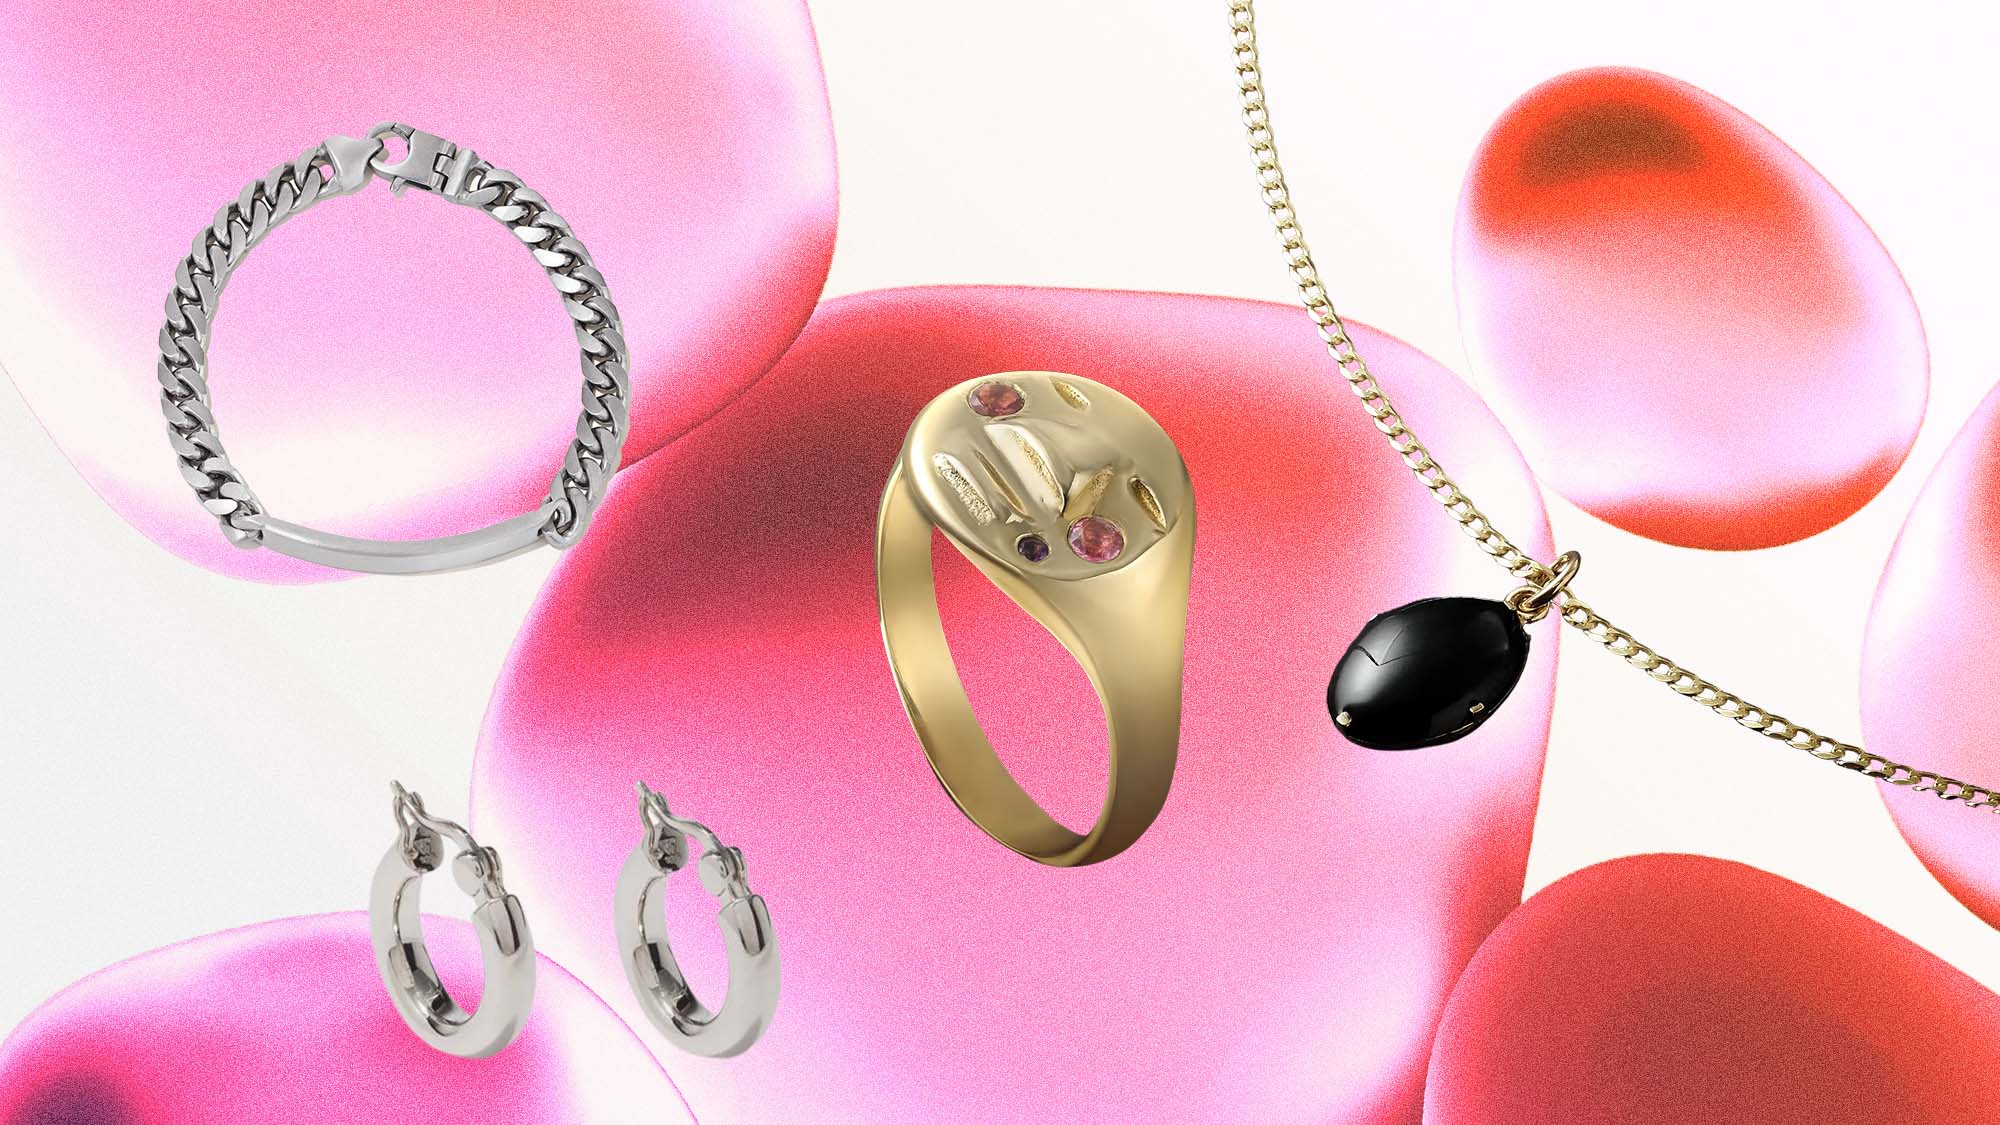 black-friday,-it-turns-out,-is-the-best-time-to-score-some-rad-jewelry